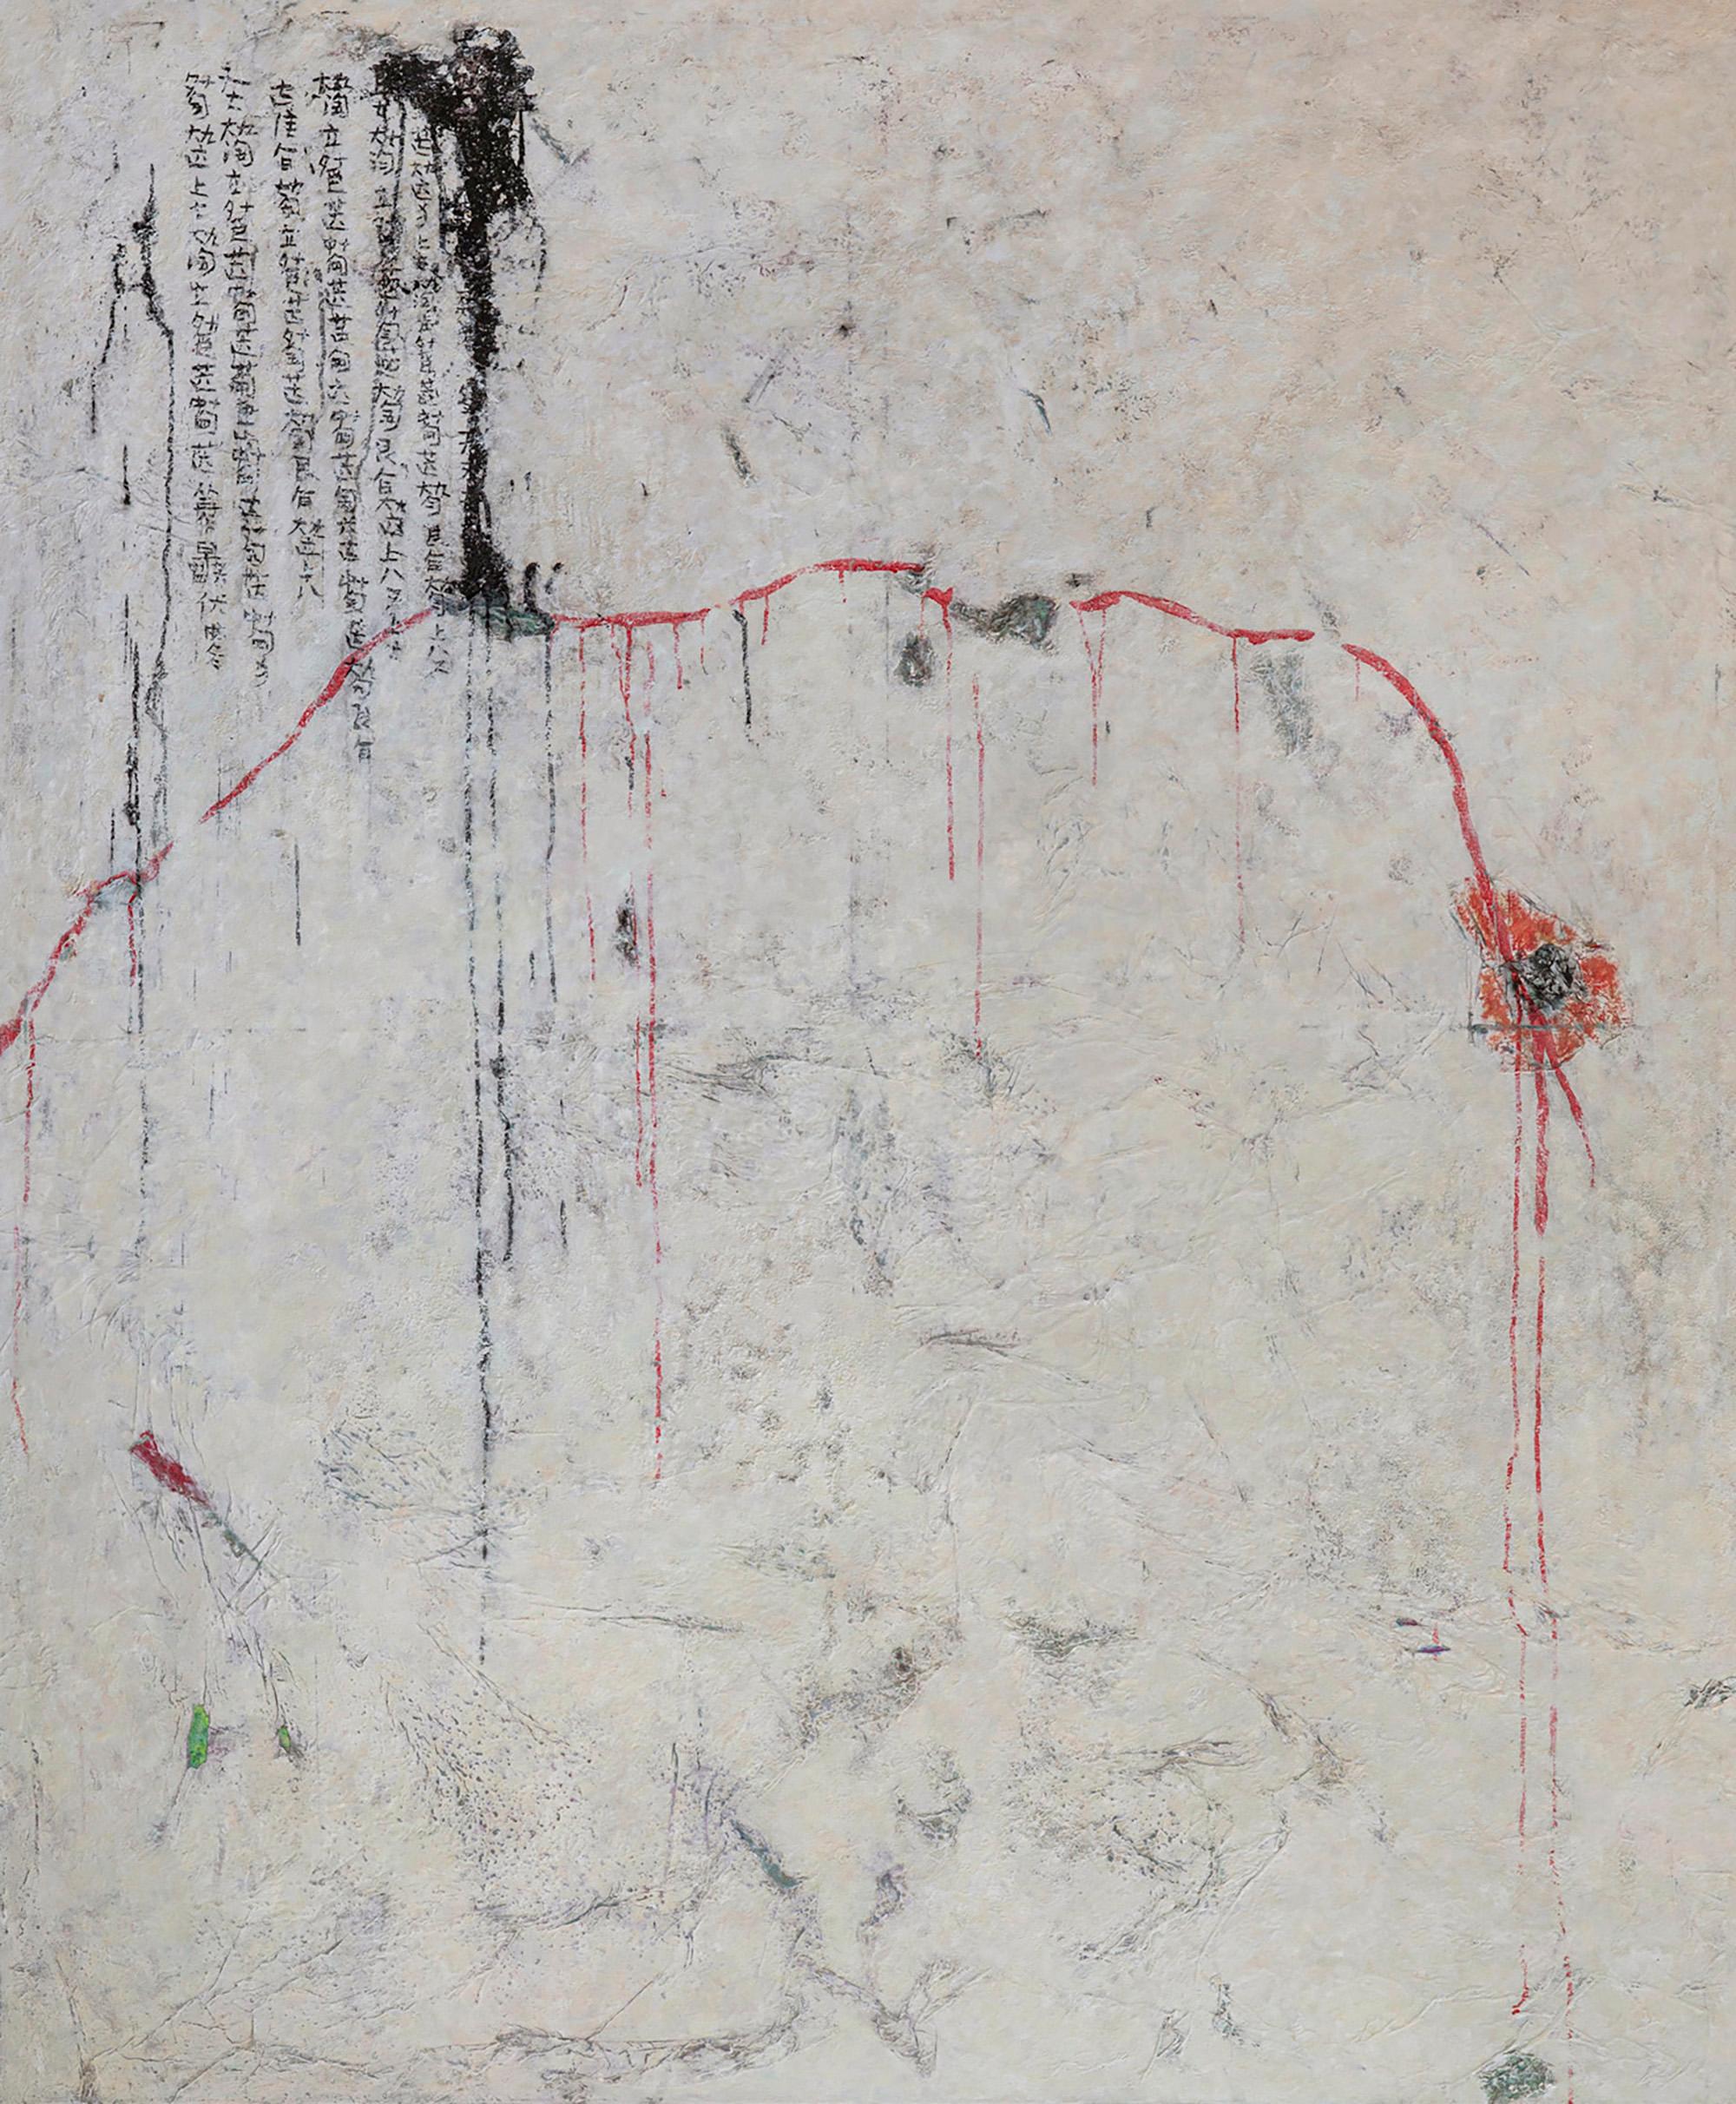 Loy Luo Abstract Painting - "Guqin 1"- Softly Colored Mixed Media Painting with Chinese Musical Characters